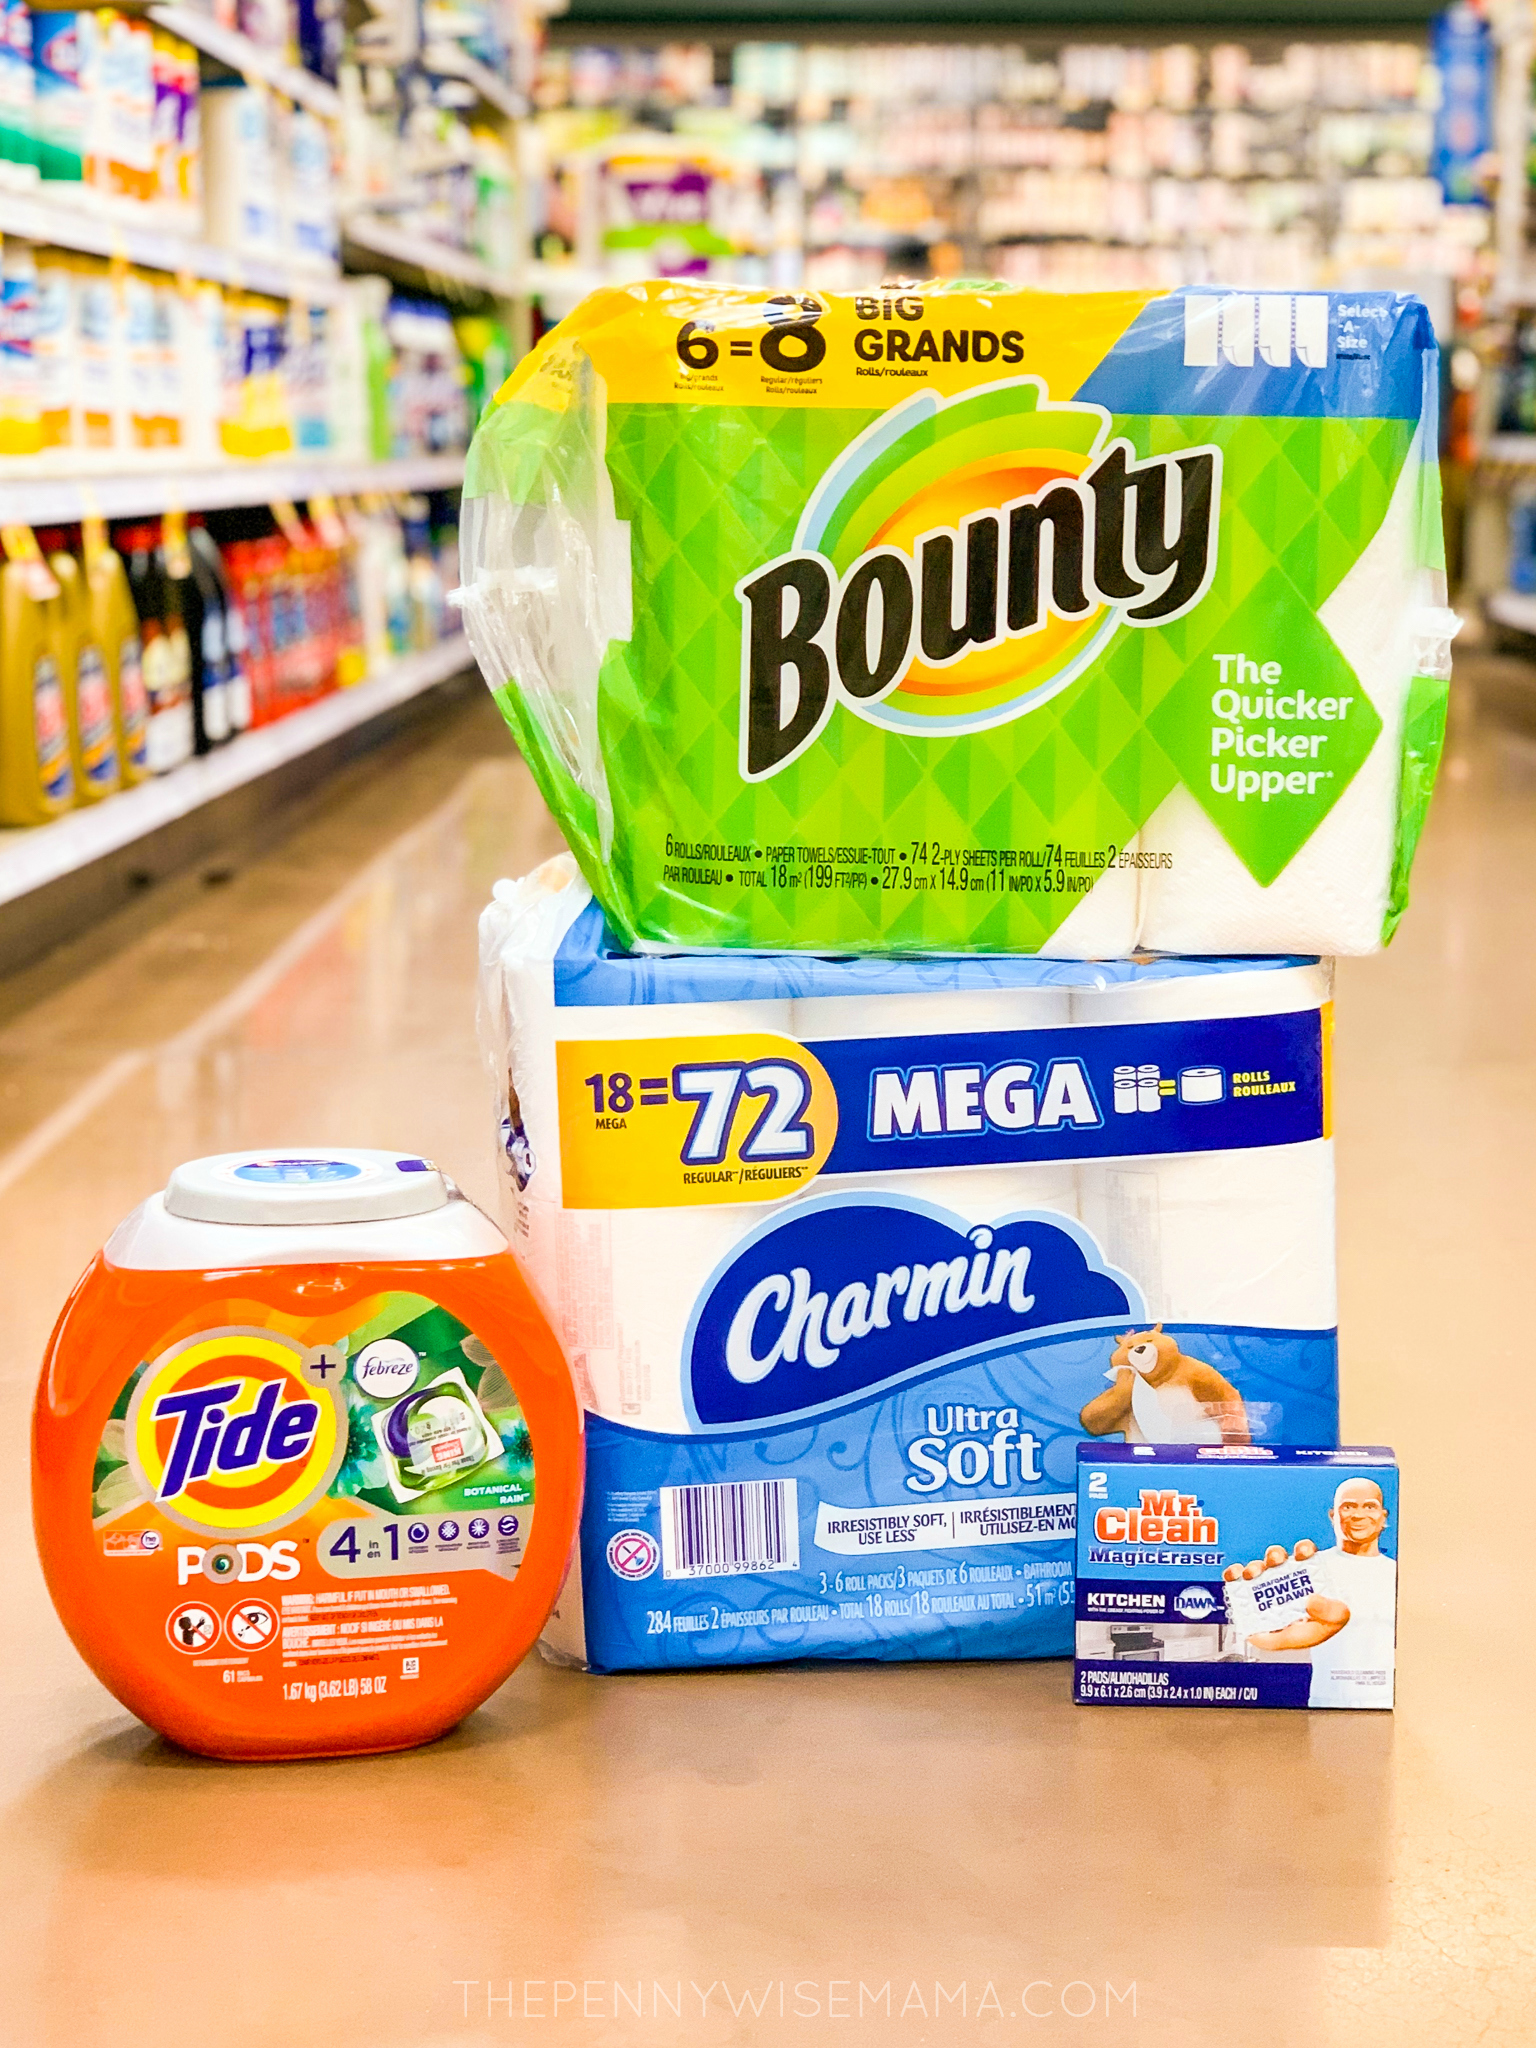 P&G Rebate Offer: Get $15 VISA Gift Card with $50 P&G Purchase - The  PennyWiseMama